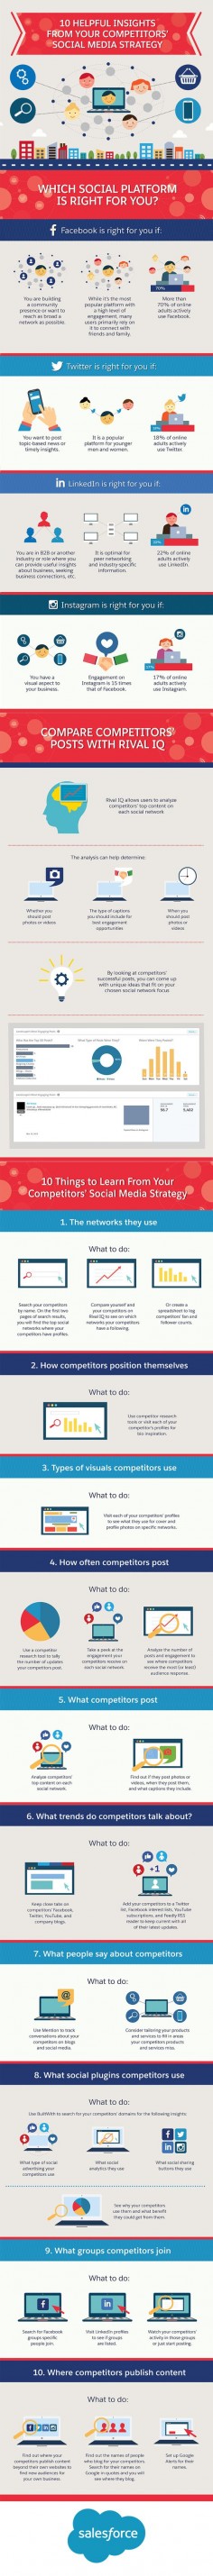 10 Things To Learn From Your Competitors’ Social Media Marketing Strategy - #infographic